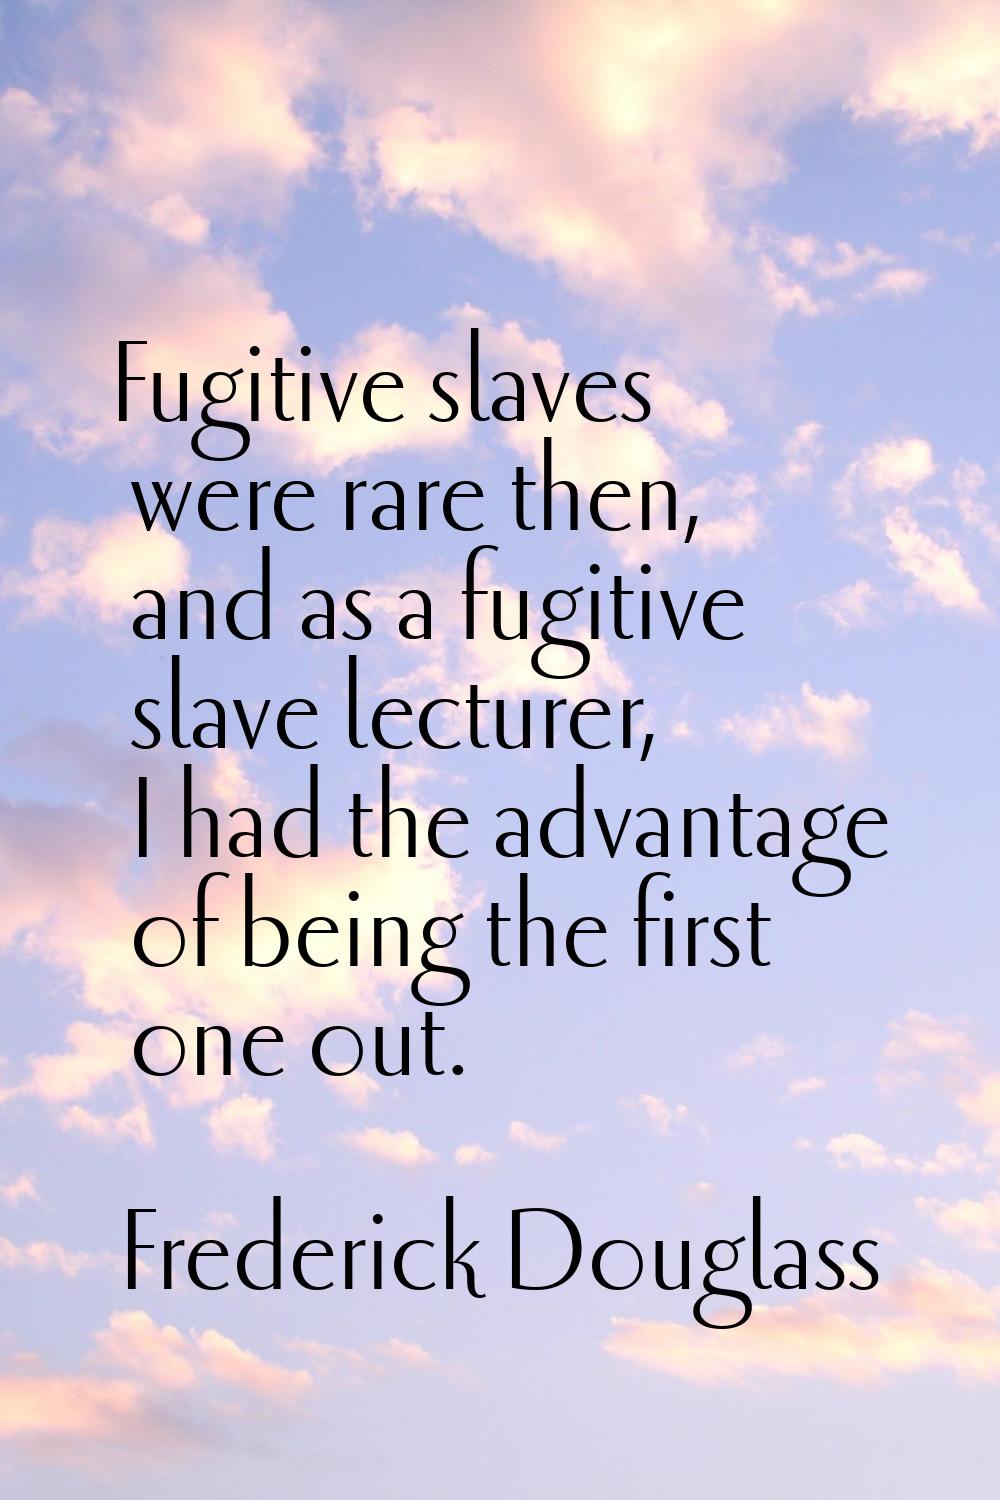 Fugitive slaves were rare then, and as a fugitive slave lecturer, I had the advantage of being the 